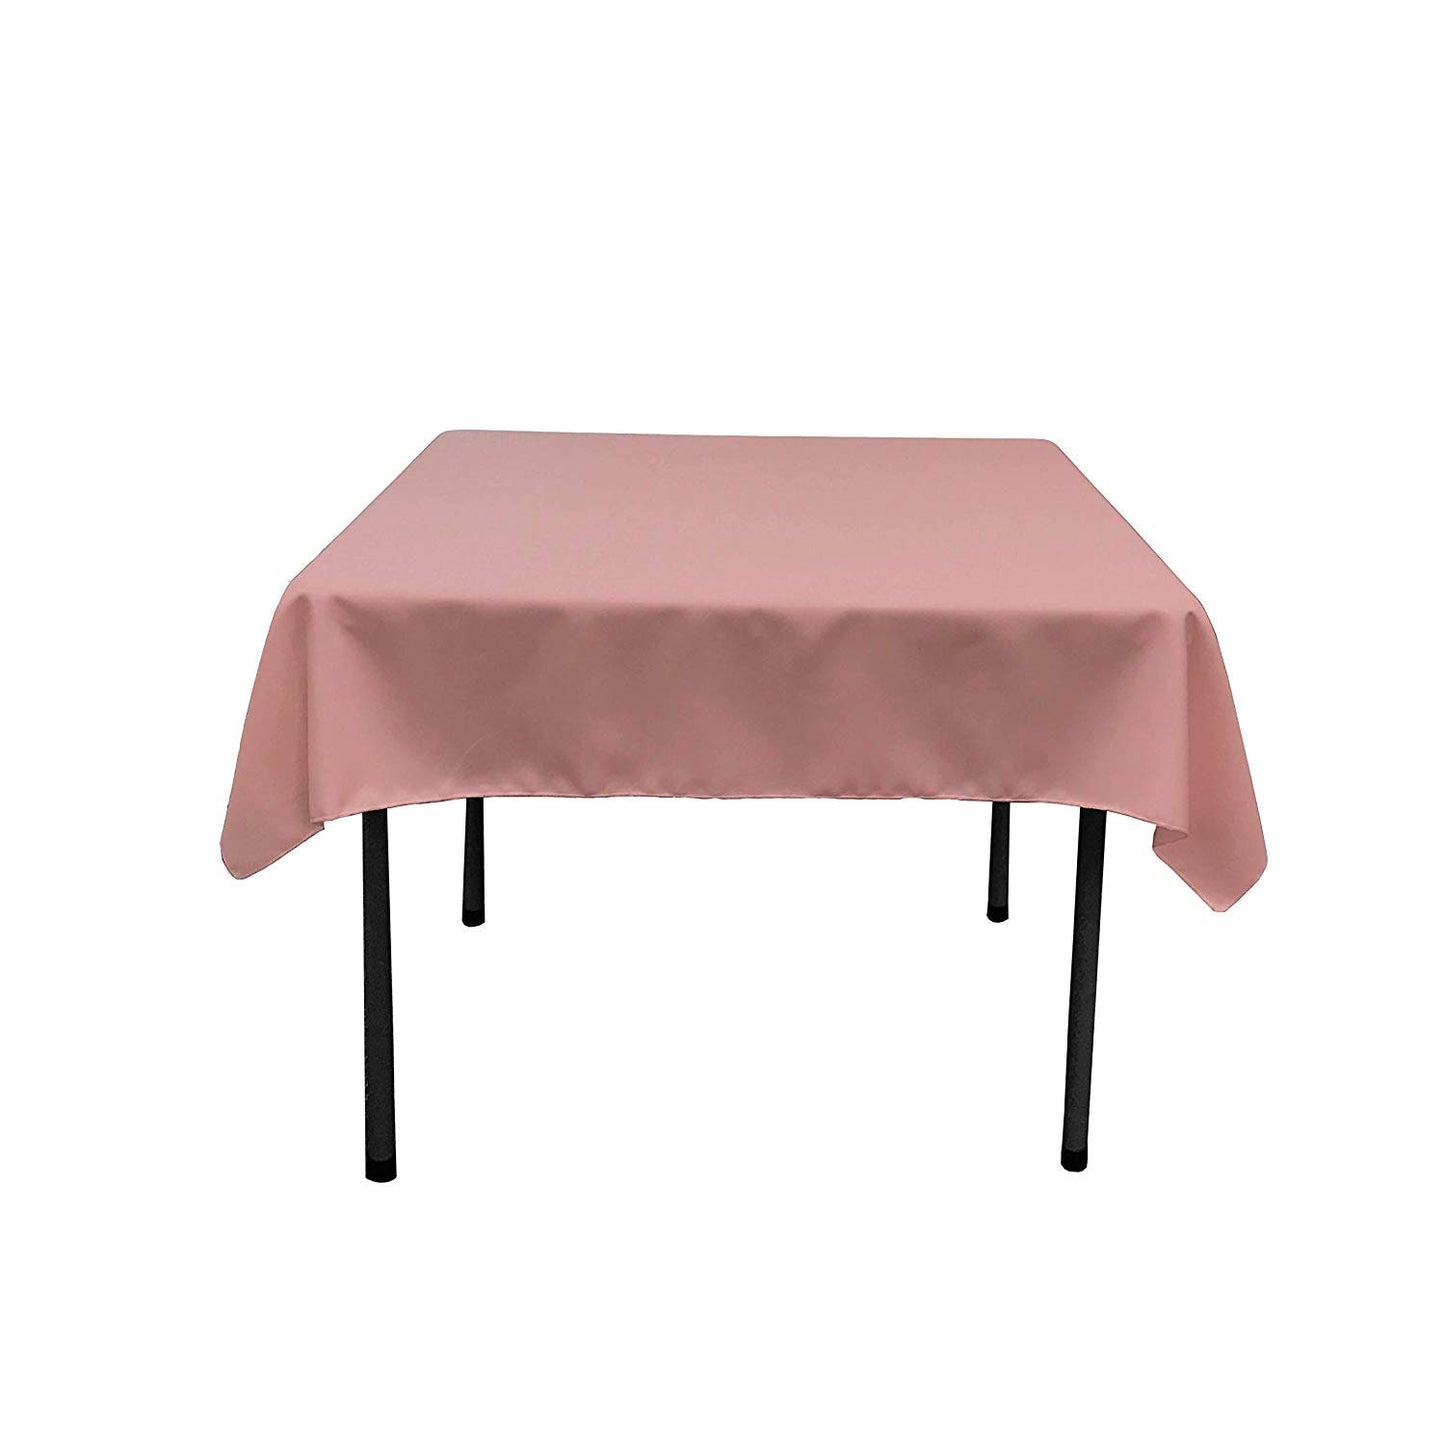 54 x 54-Inch Seamless Dusty Rose Rectangular Polyester Tablecloth for Wedding Party Decorations Square Table Cloth Cover